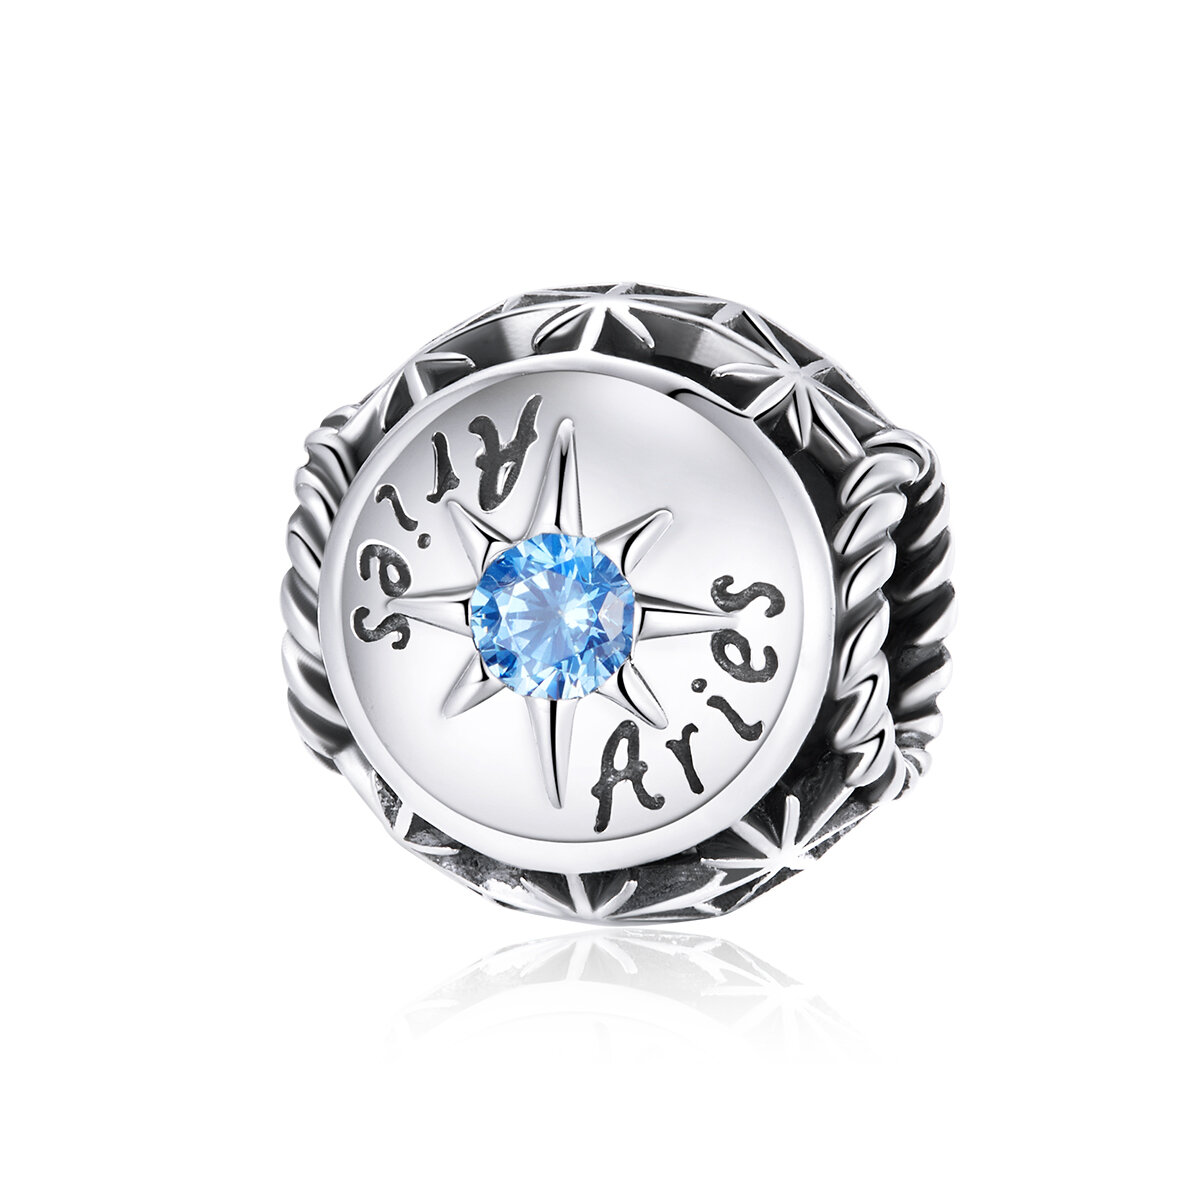 GemKing 12 Zodiac signs S925 Sterling Silver Charms